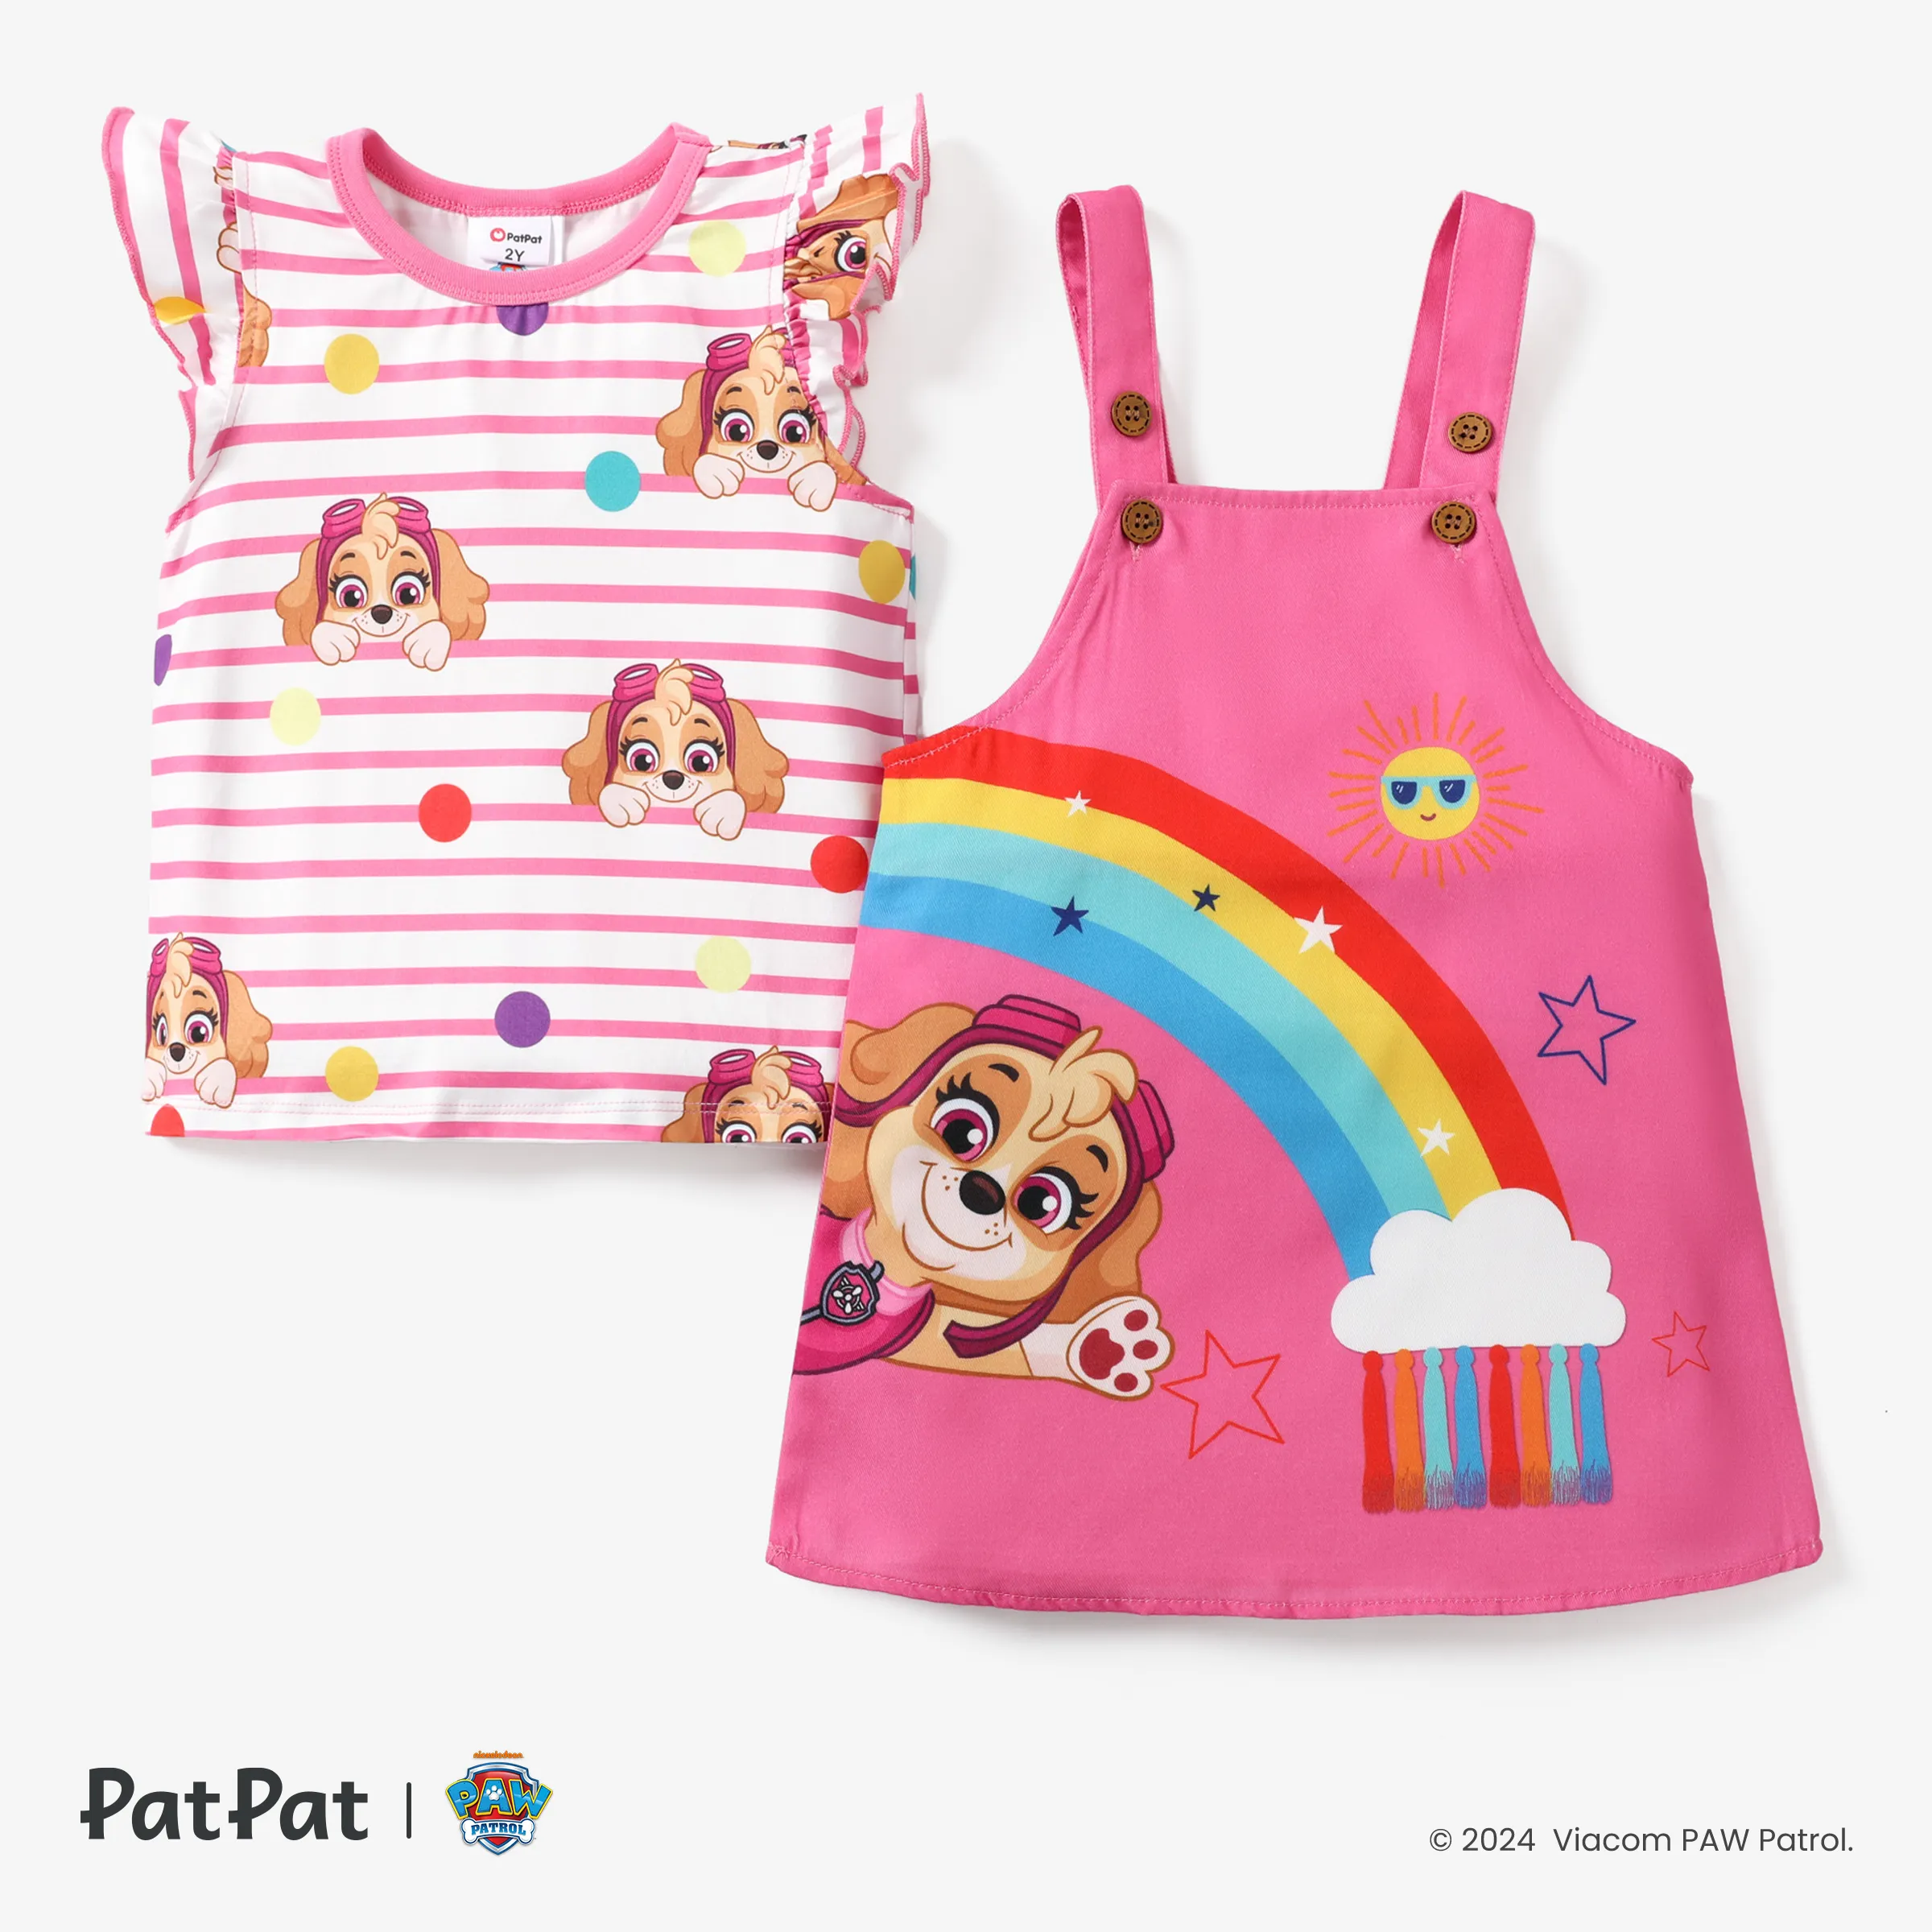 Paw Patrol 2pcs Toddler Girls Character Print Striped Puff-Sleeve Top with Rainbow Strap Dress Set